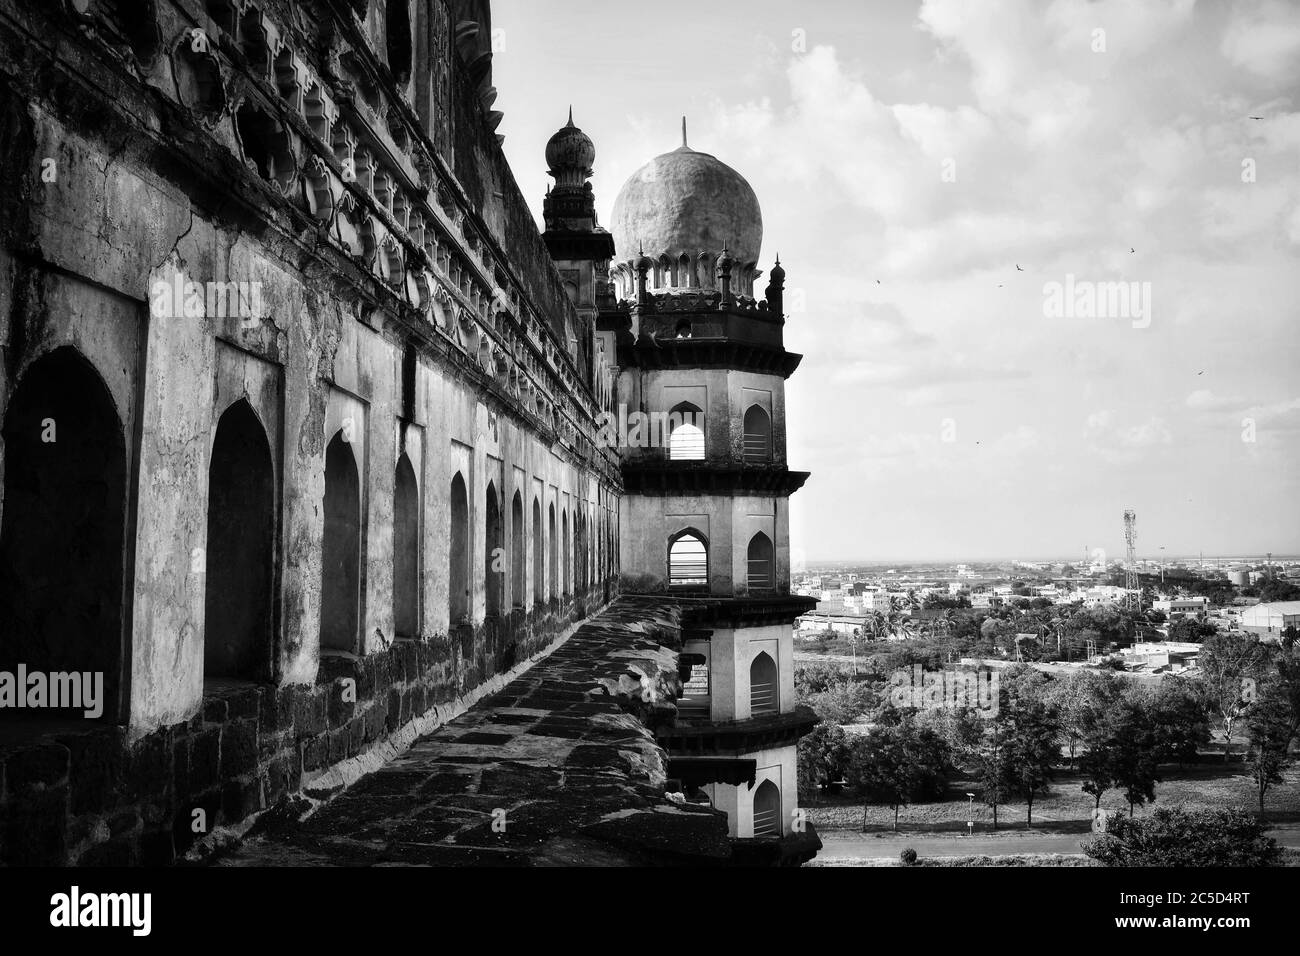 The side part of gol gumbaz monument.The black and white view of the tomb Stock Photo